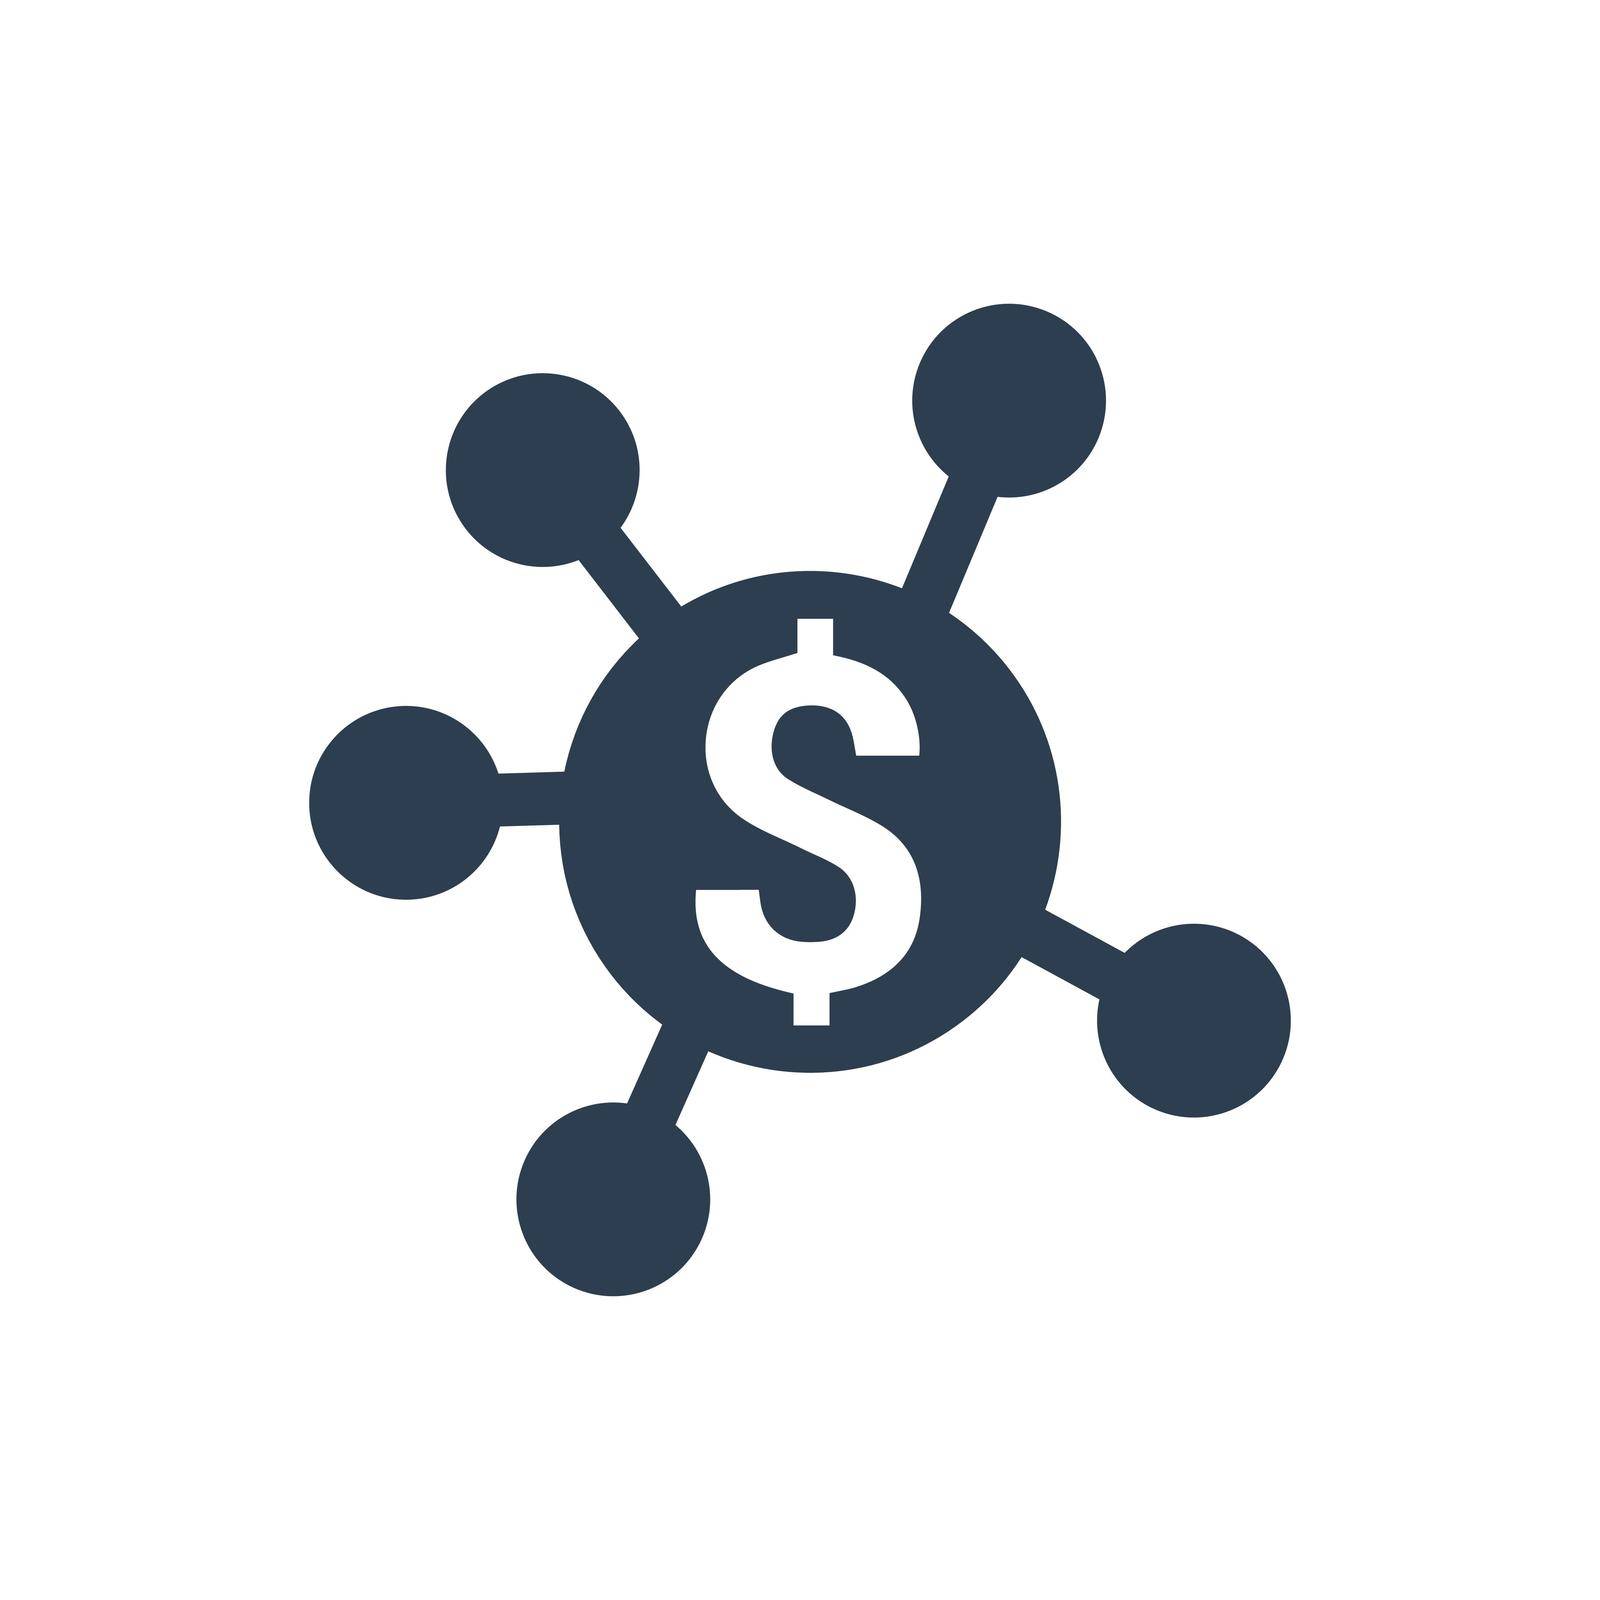 Financial Network icon. Vector EPS file.